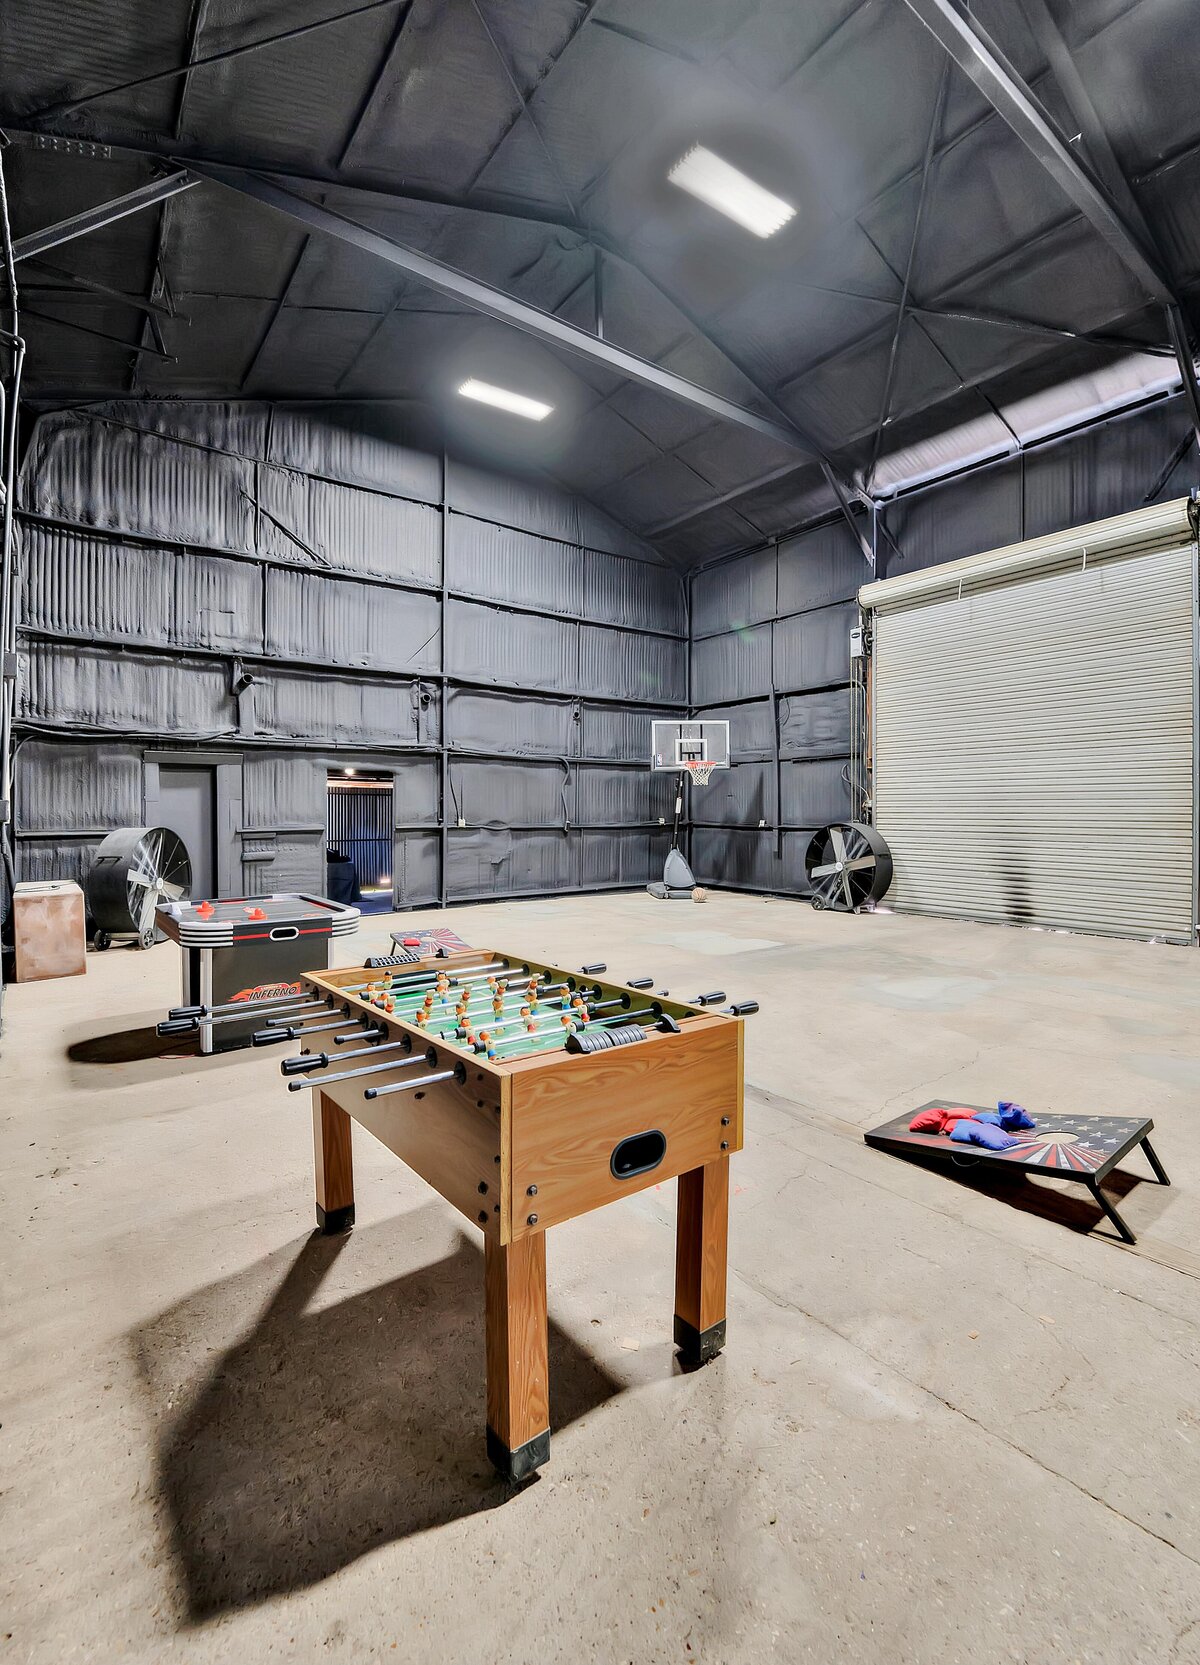 Garage entertainment room with game tables in this four-bedroom, four-bathroom vacation rental home and guest house with free WiFi, fully equipped kitchen, firepit and room for 10 in Waco, TX.